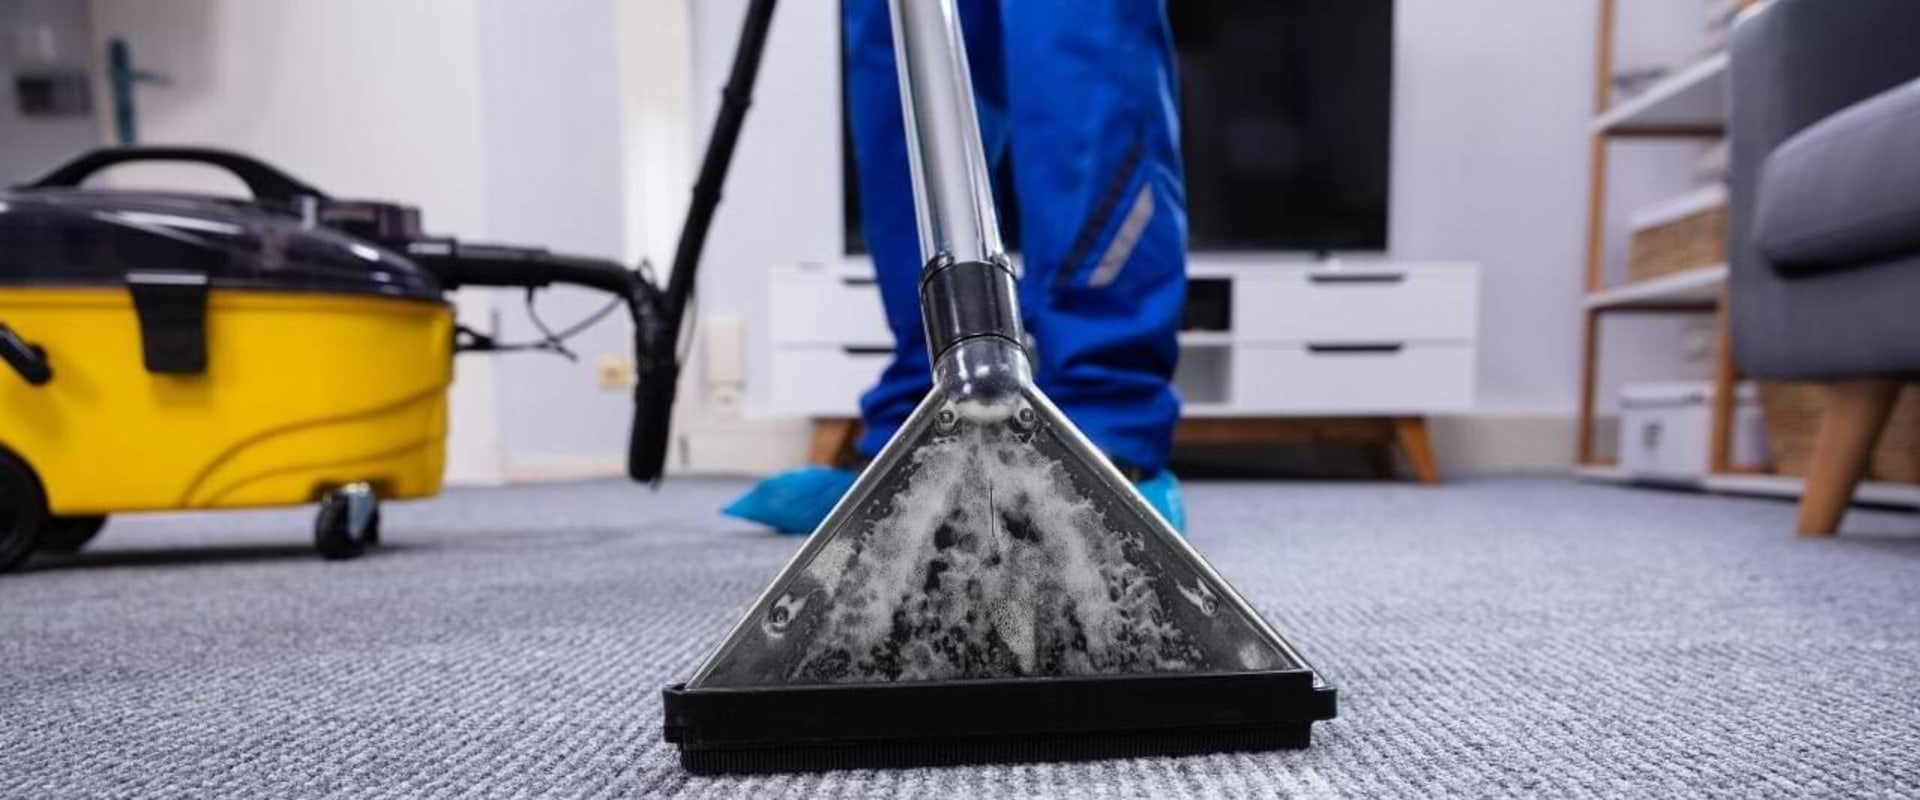 What is the best professional carpet cleaning system?